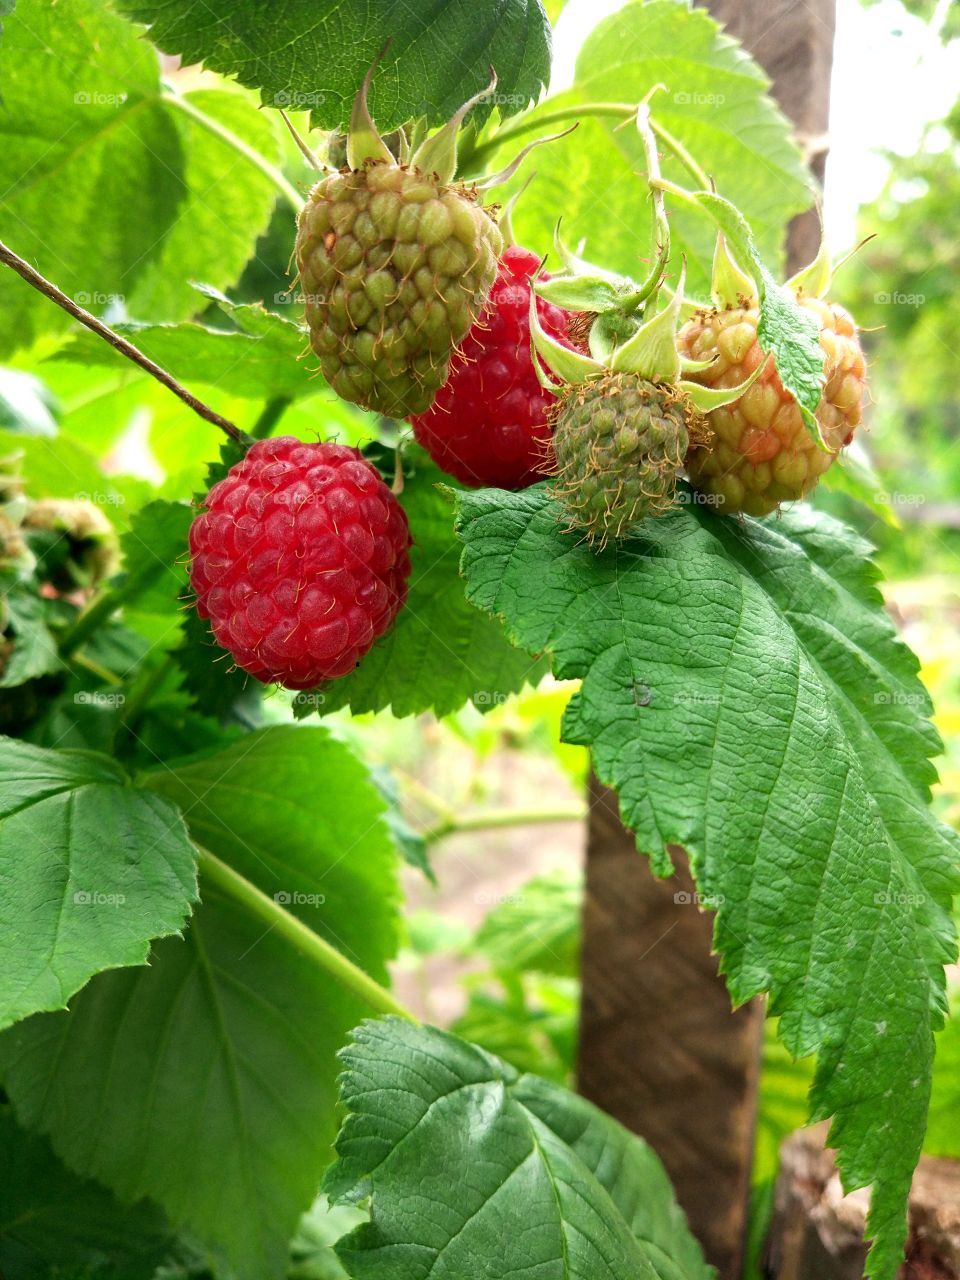 Raspberries on the tree with leafs